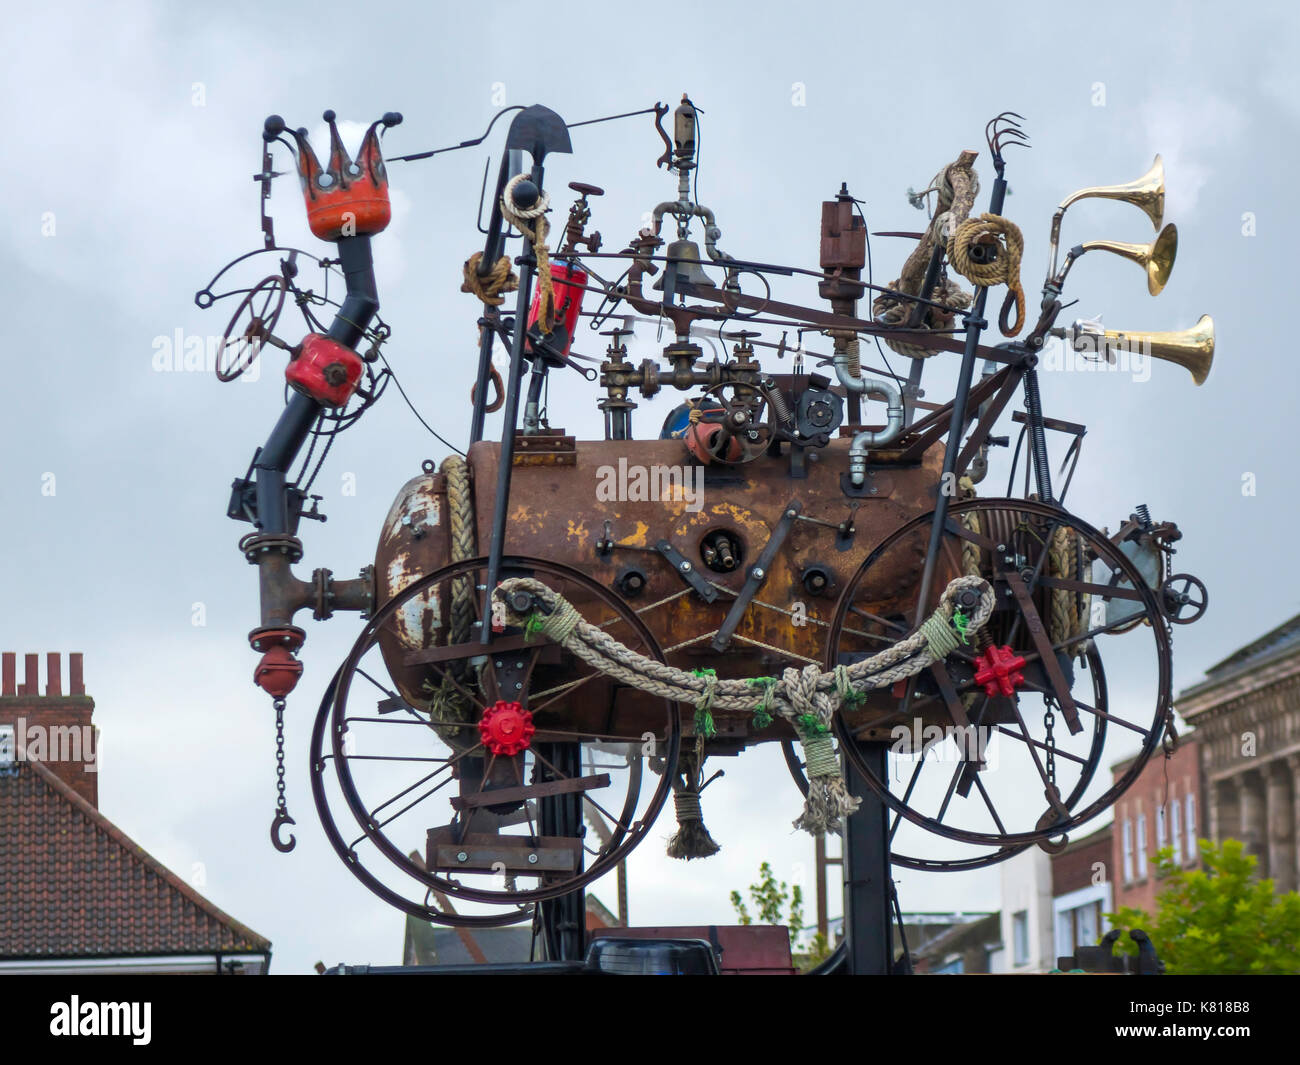 The Stockton Flyer automaton sculpture based on Stephensons Locomotion designed by Rob Higgs has bells whistles and blows steam Stock Photo